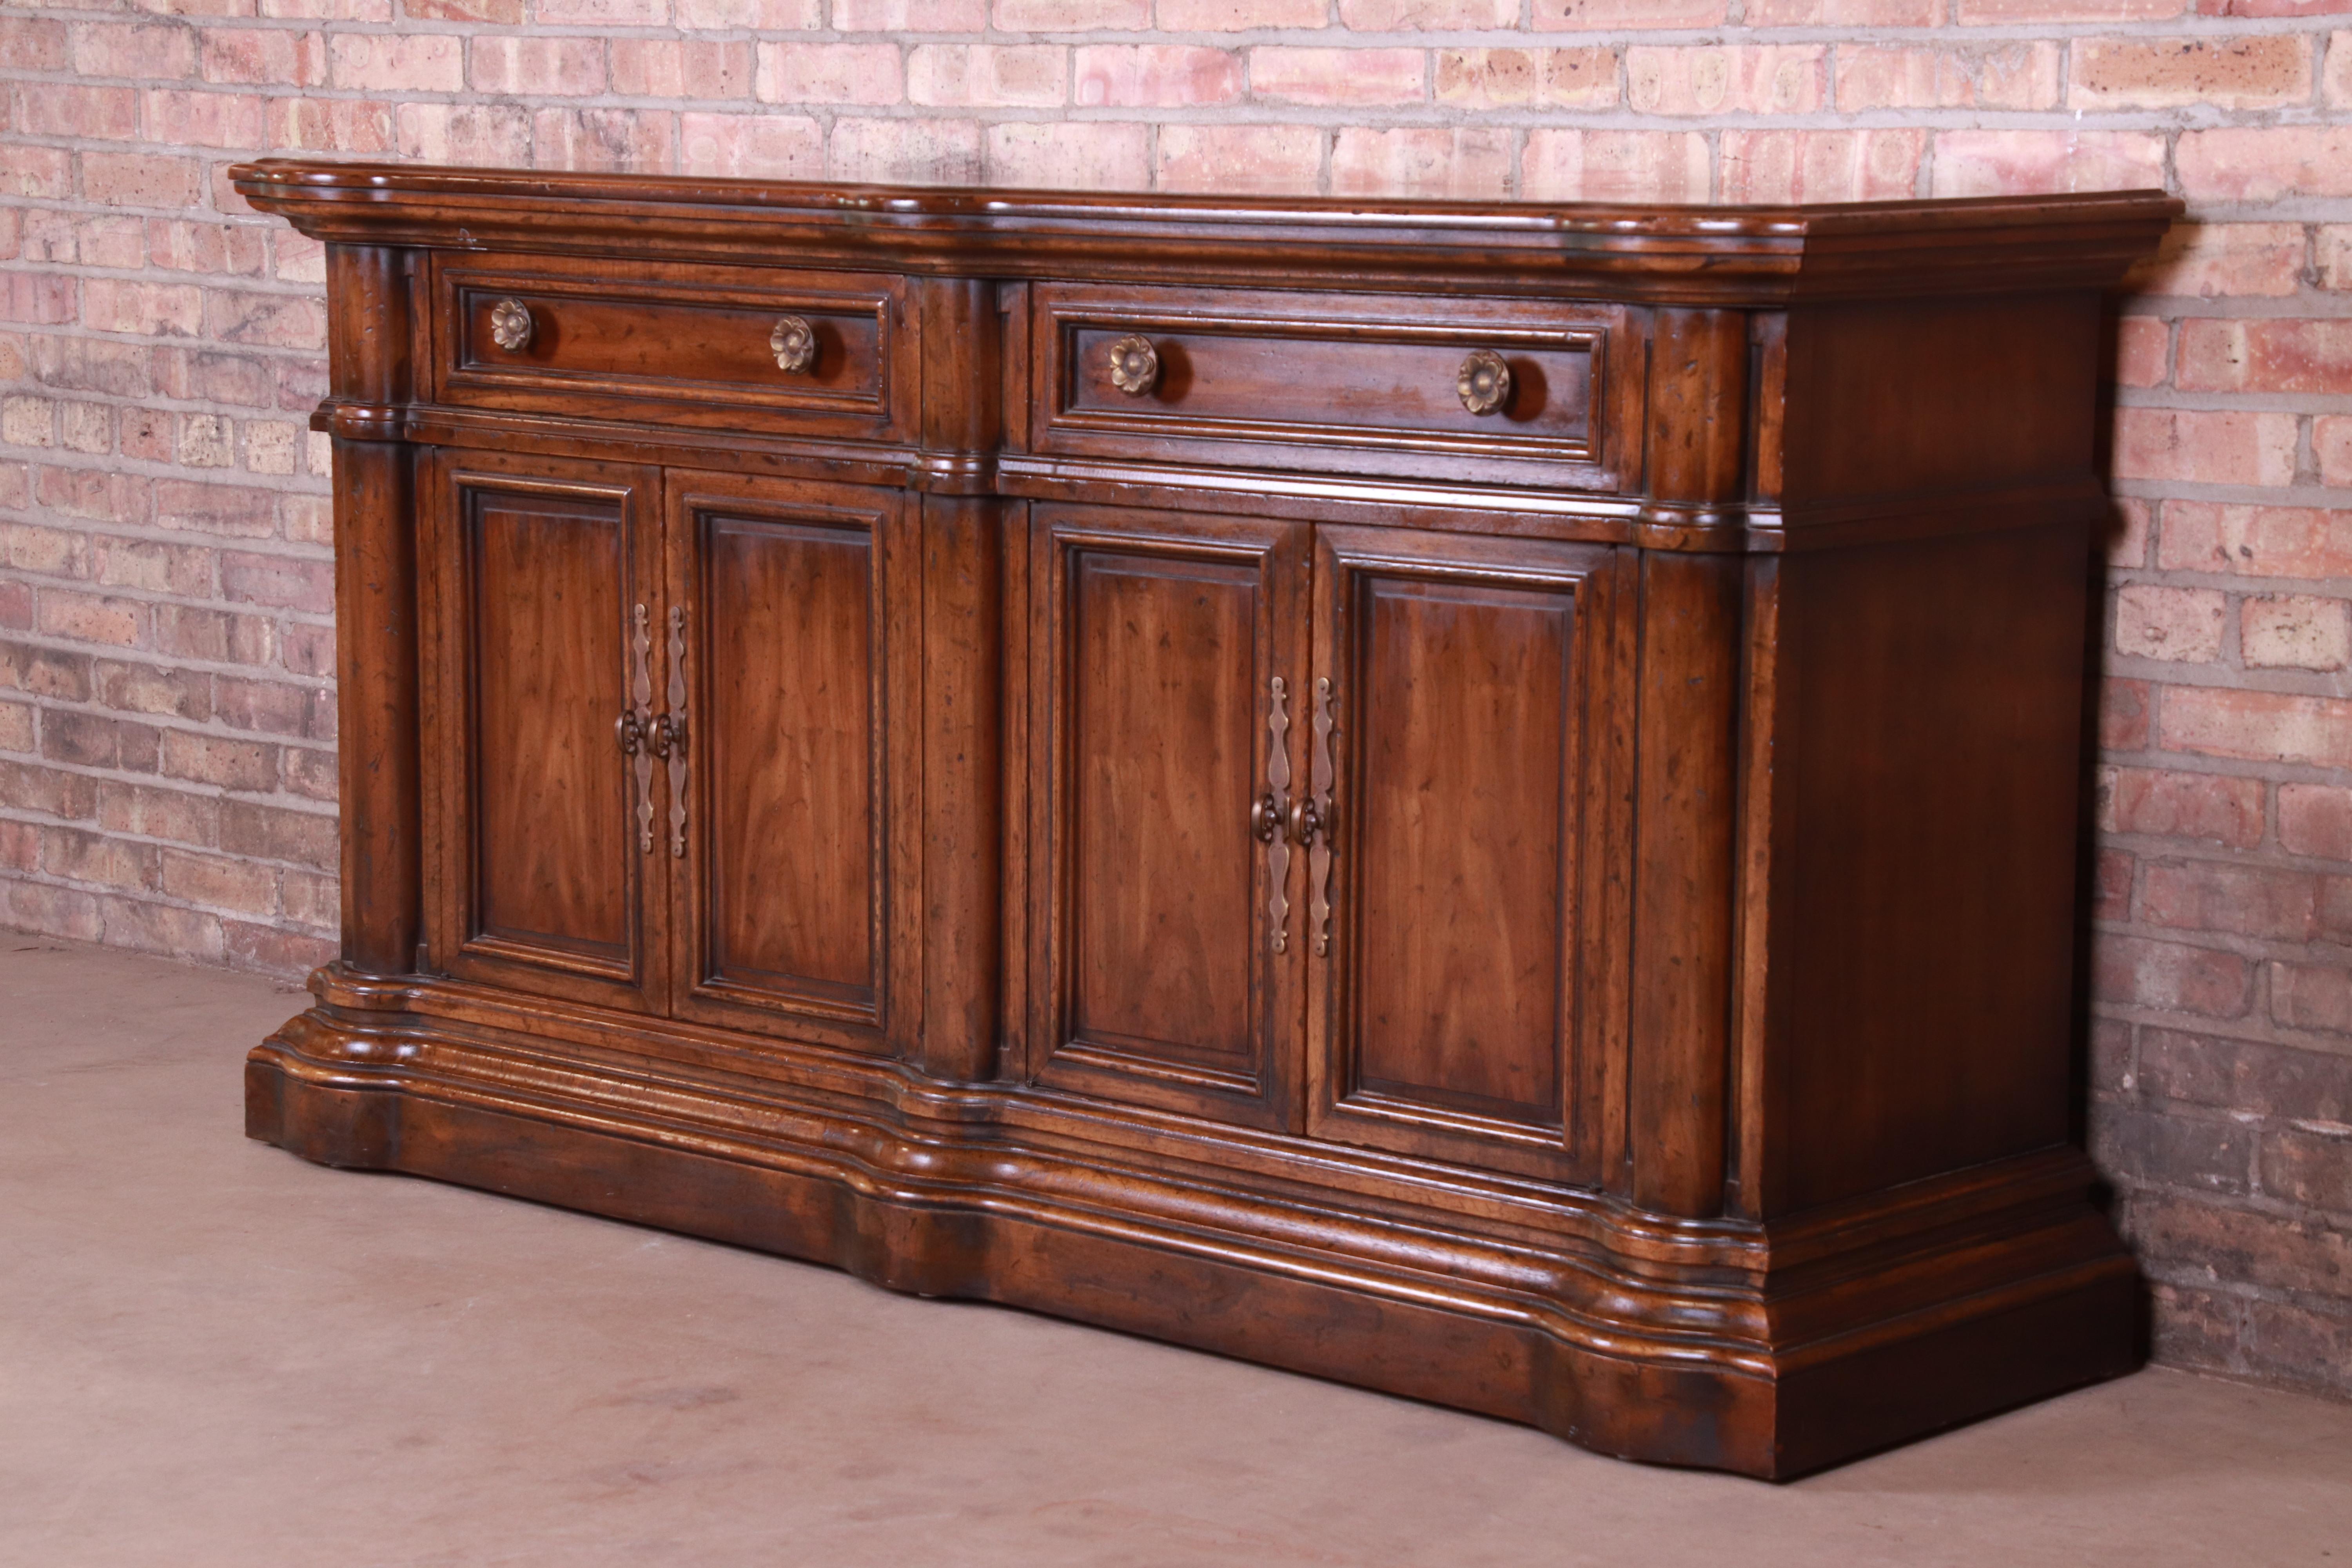 American Heritage French Provincial Walnut Sideboard Credenza or Bar Cabinet